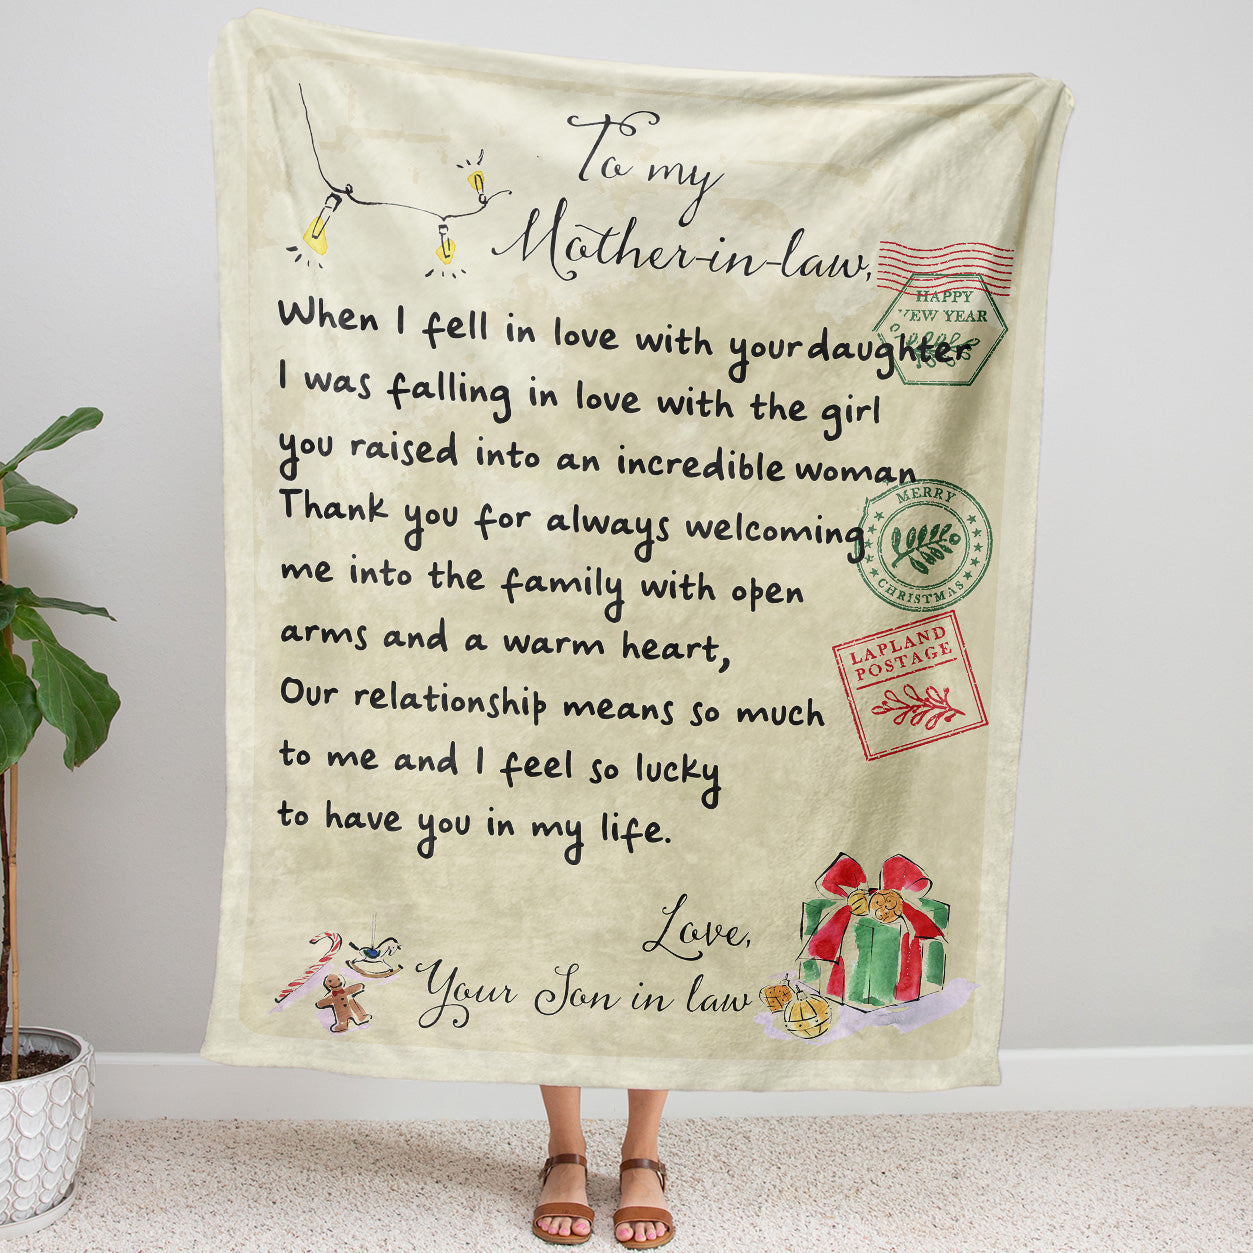 Blanket Christmas Gift ideas for Mother in Law from Son in Law Customize Personalize Love with Your Daughter 20121102 - Fleece Blanket